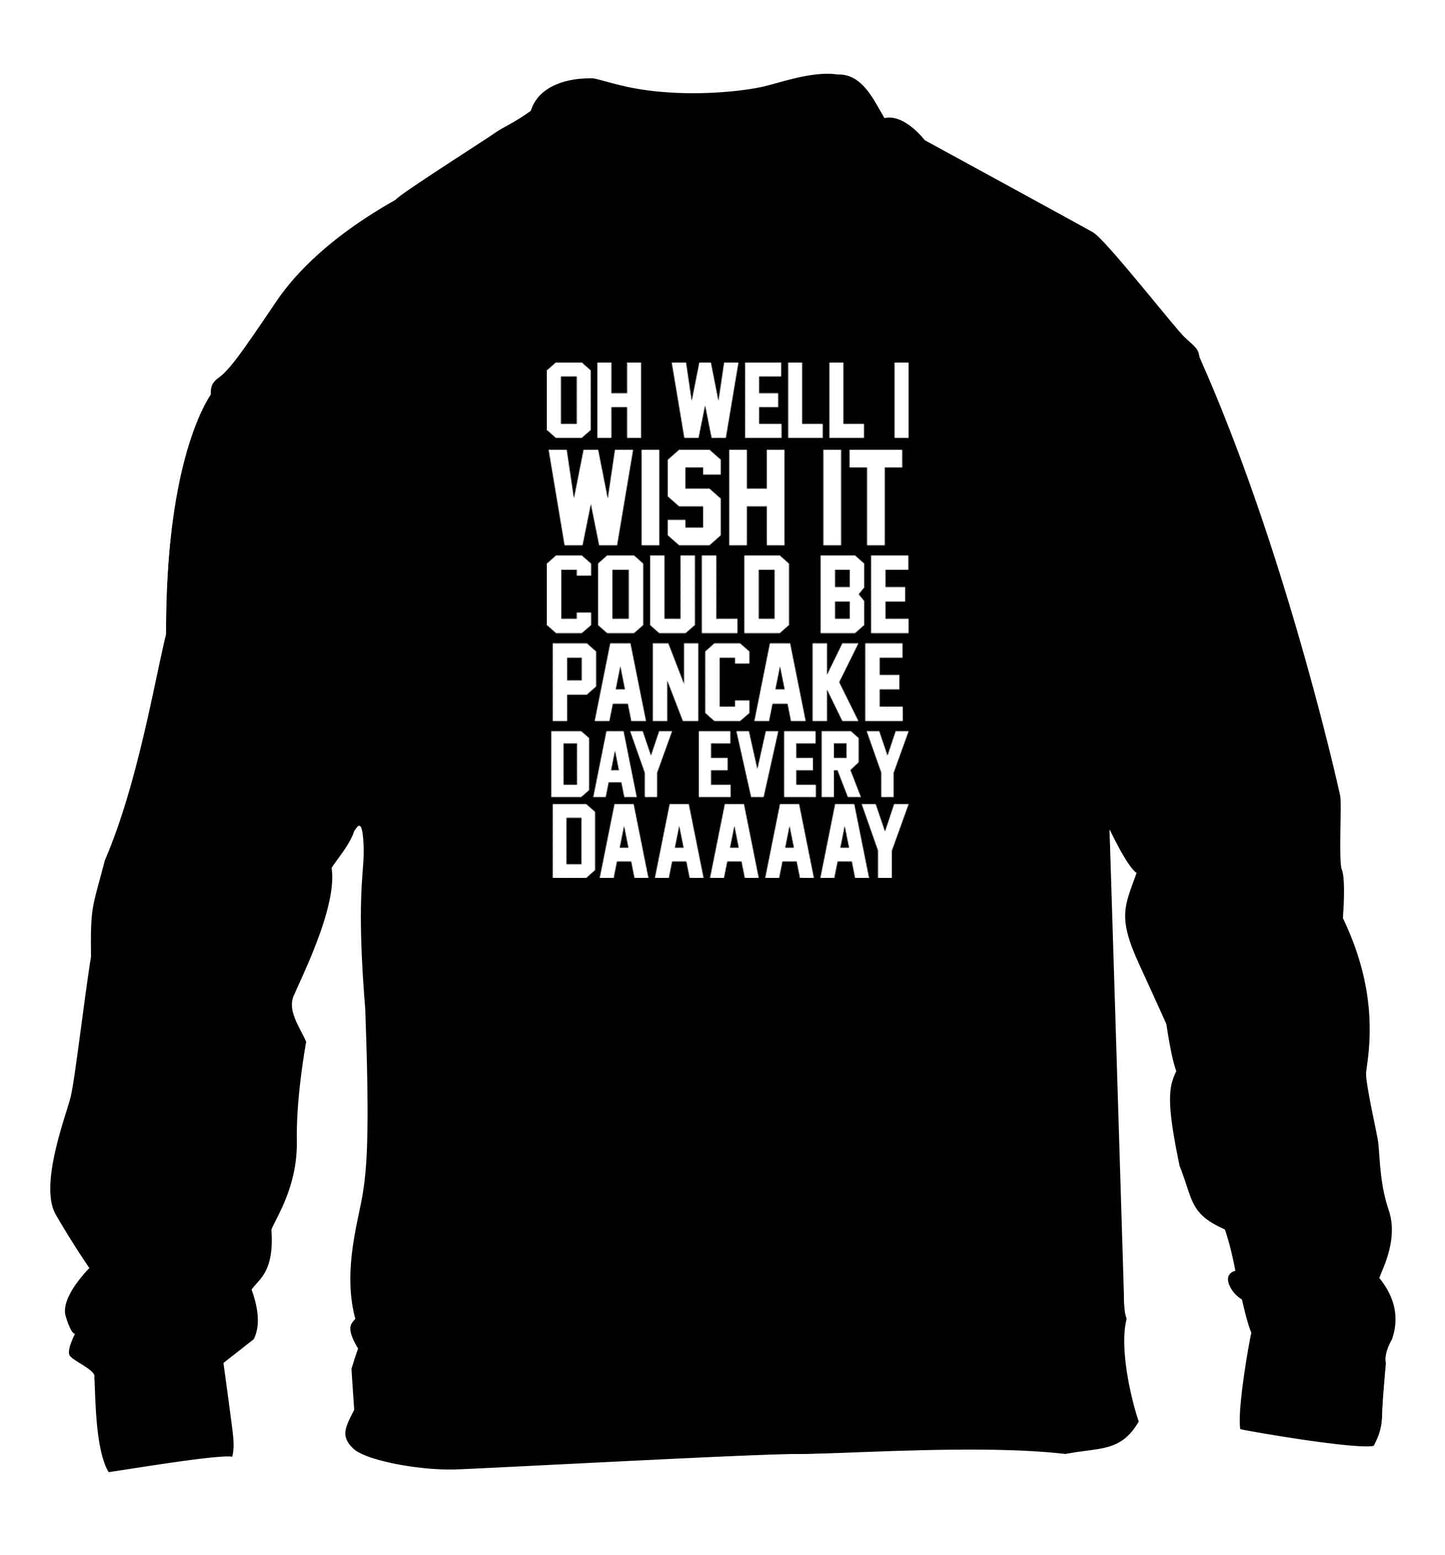 Oh well I wish it could be pancake day every day children's black sweater 12-13 Years